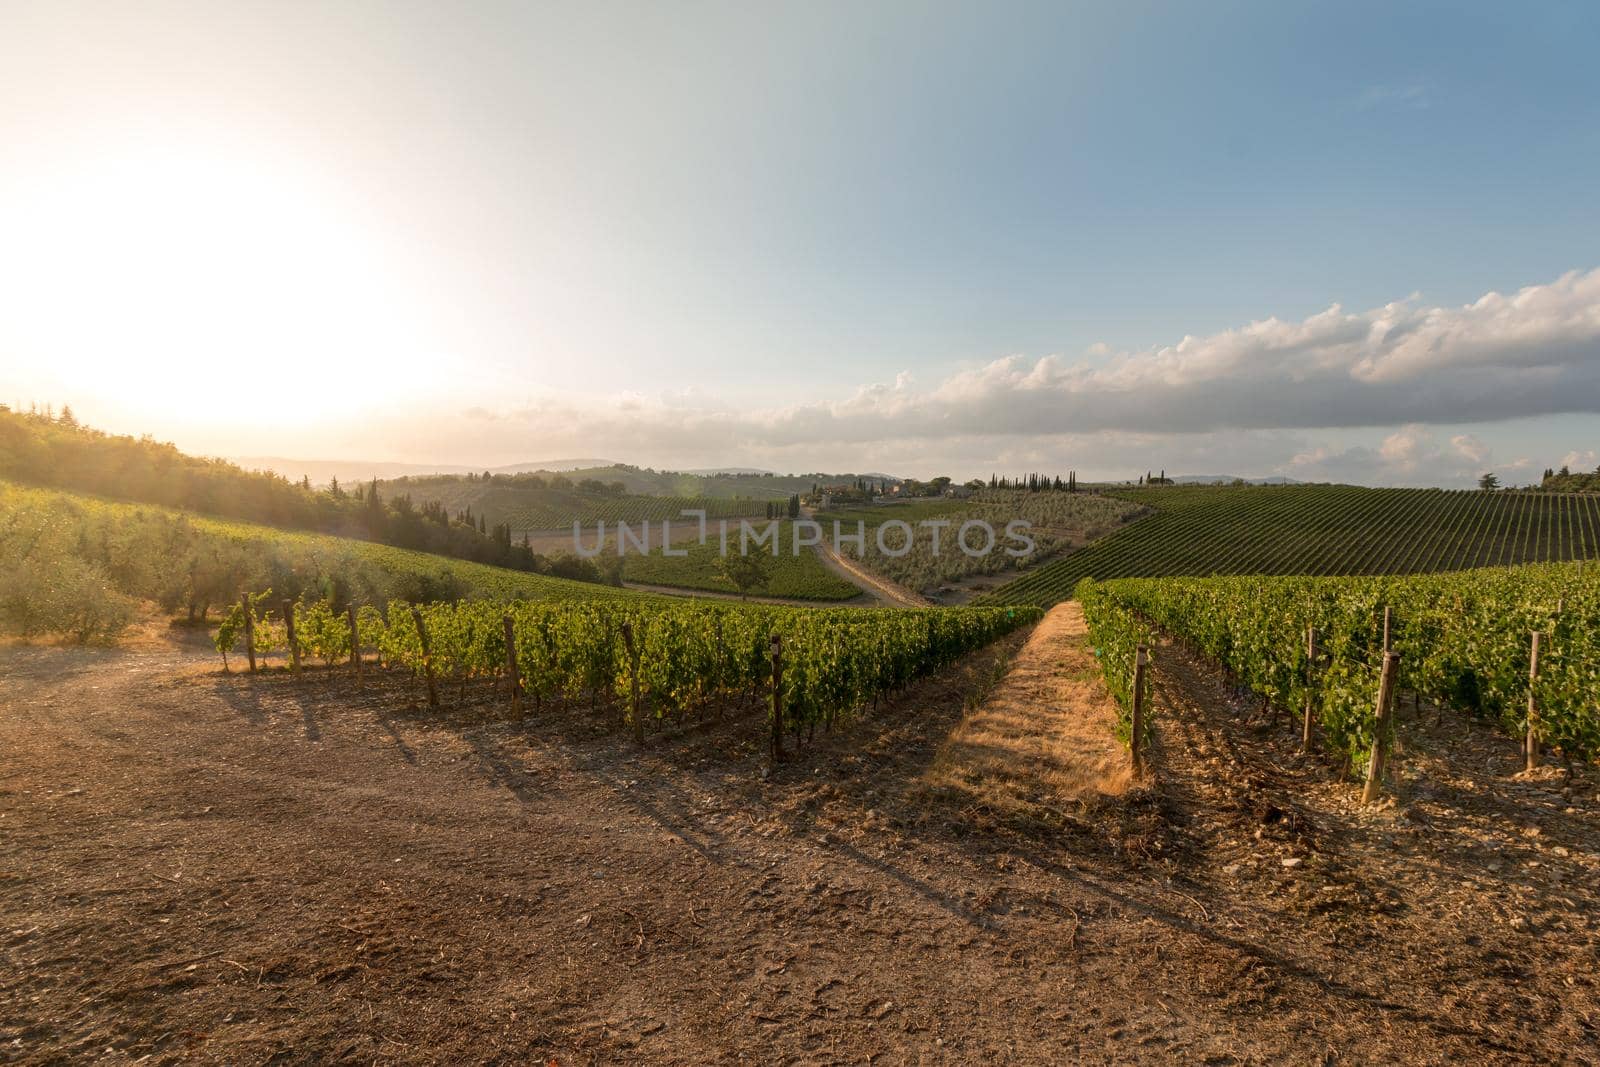 Vineyards with grapevine and winery along wine road in the evening, Tuscany, Italy by Daxenbichler